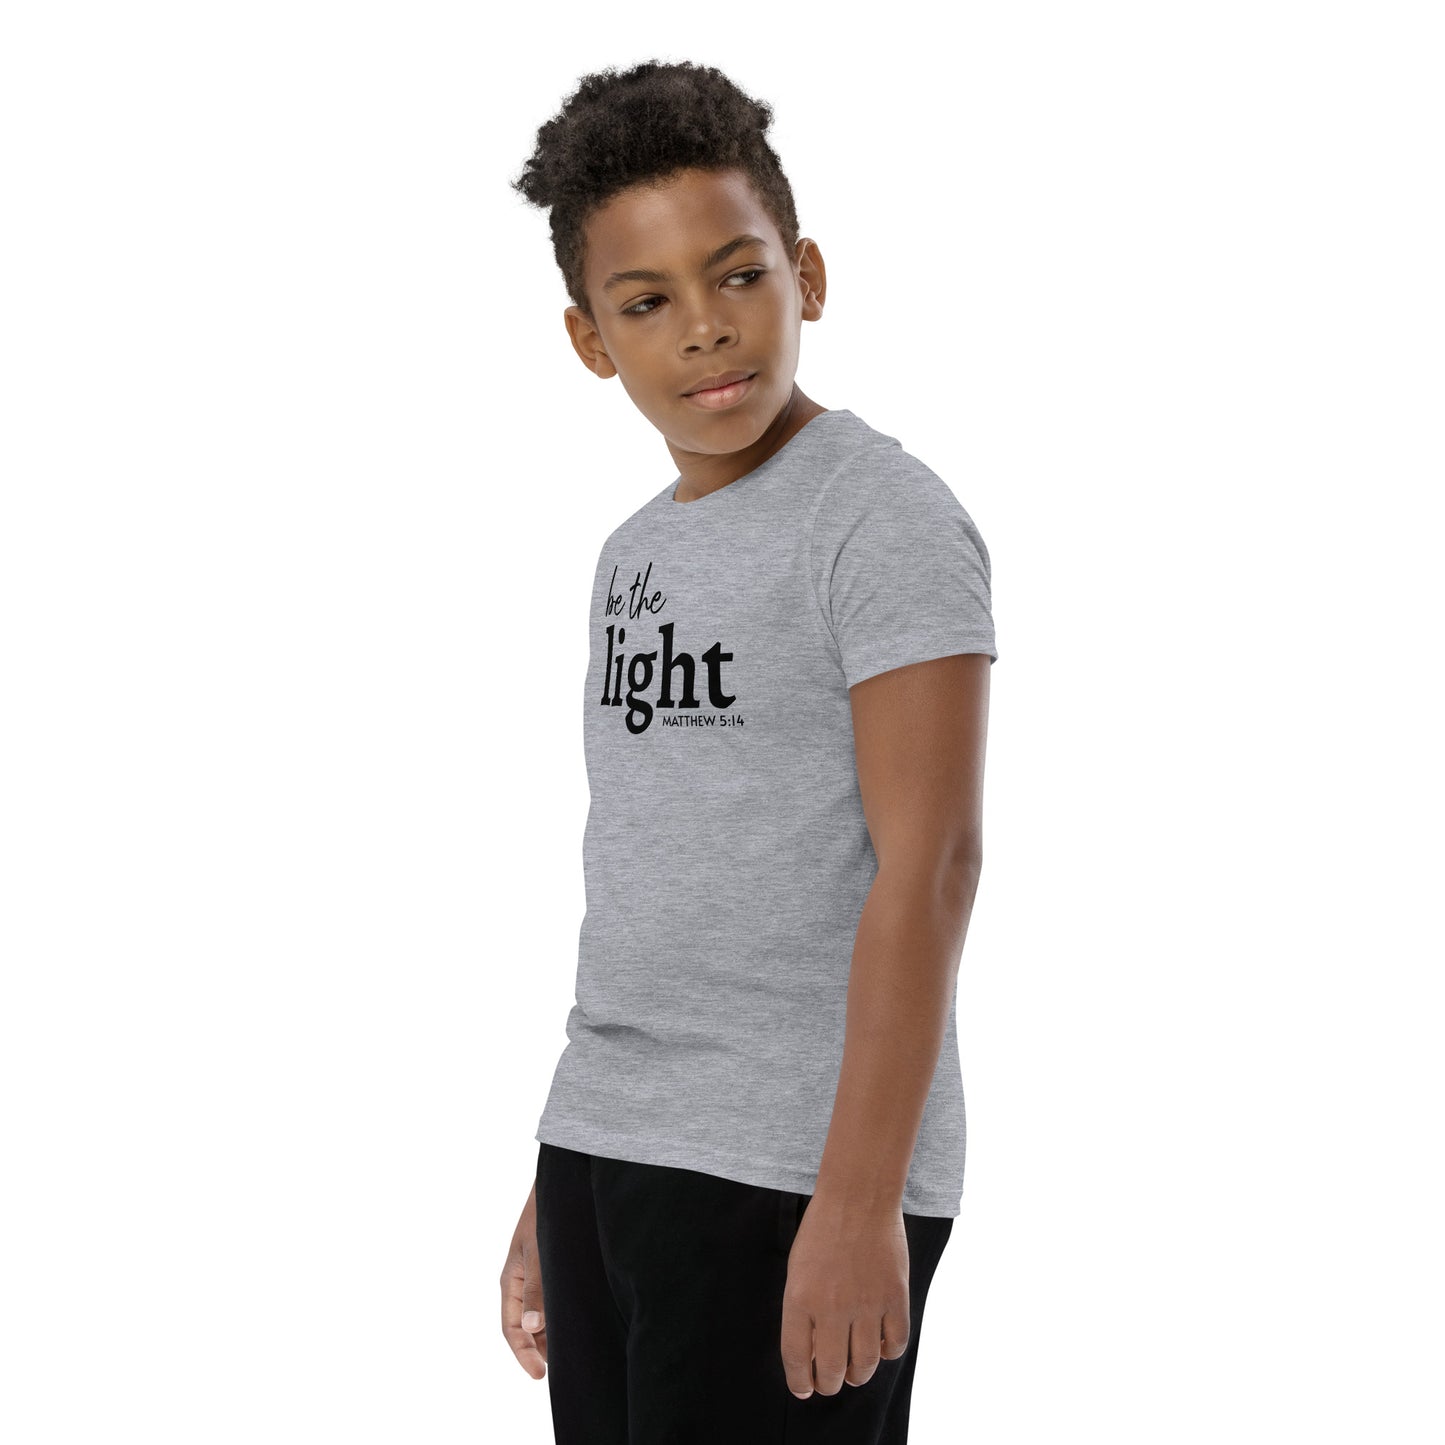 Be The Light Youth Short Sleeve T-Shirt